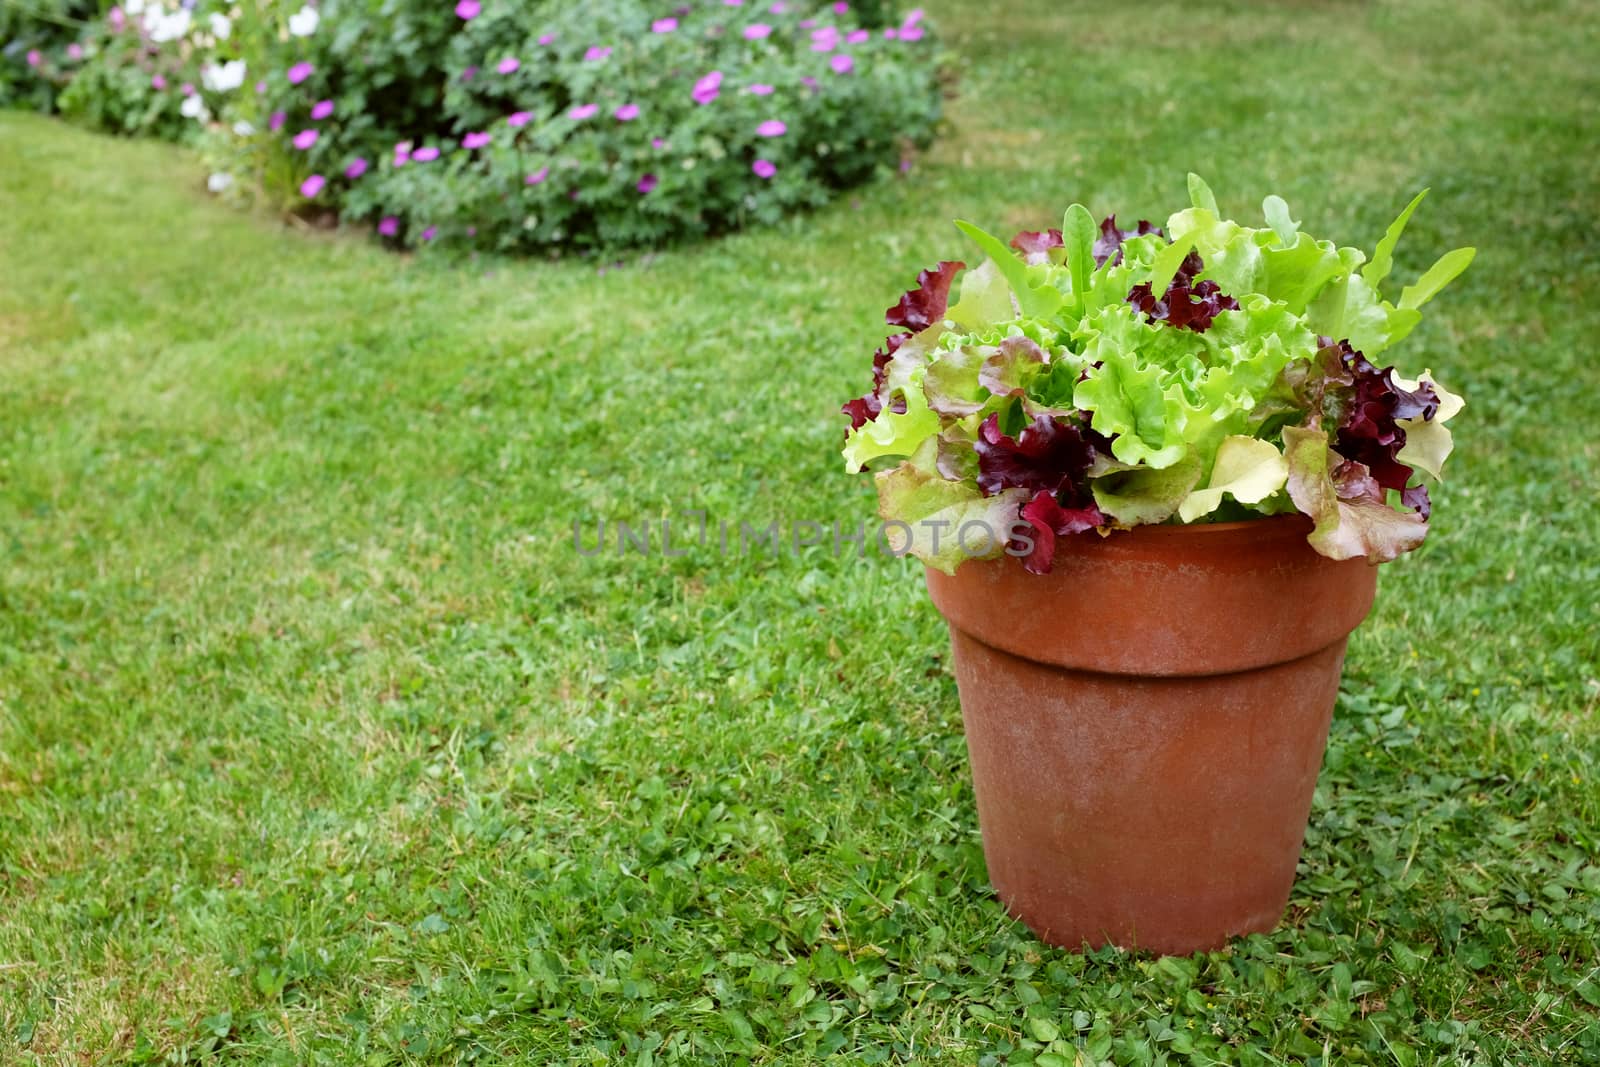 Flower pot of mixed lettuce plants, red and green salad leaves by sarahdoow